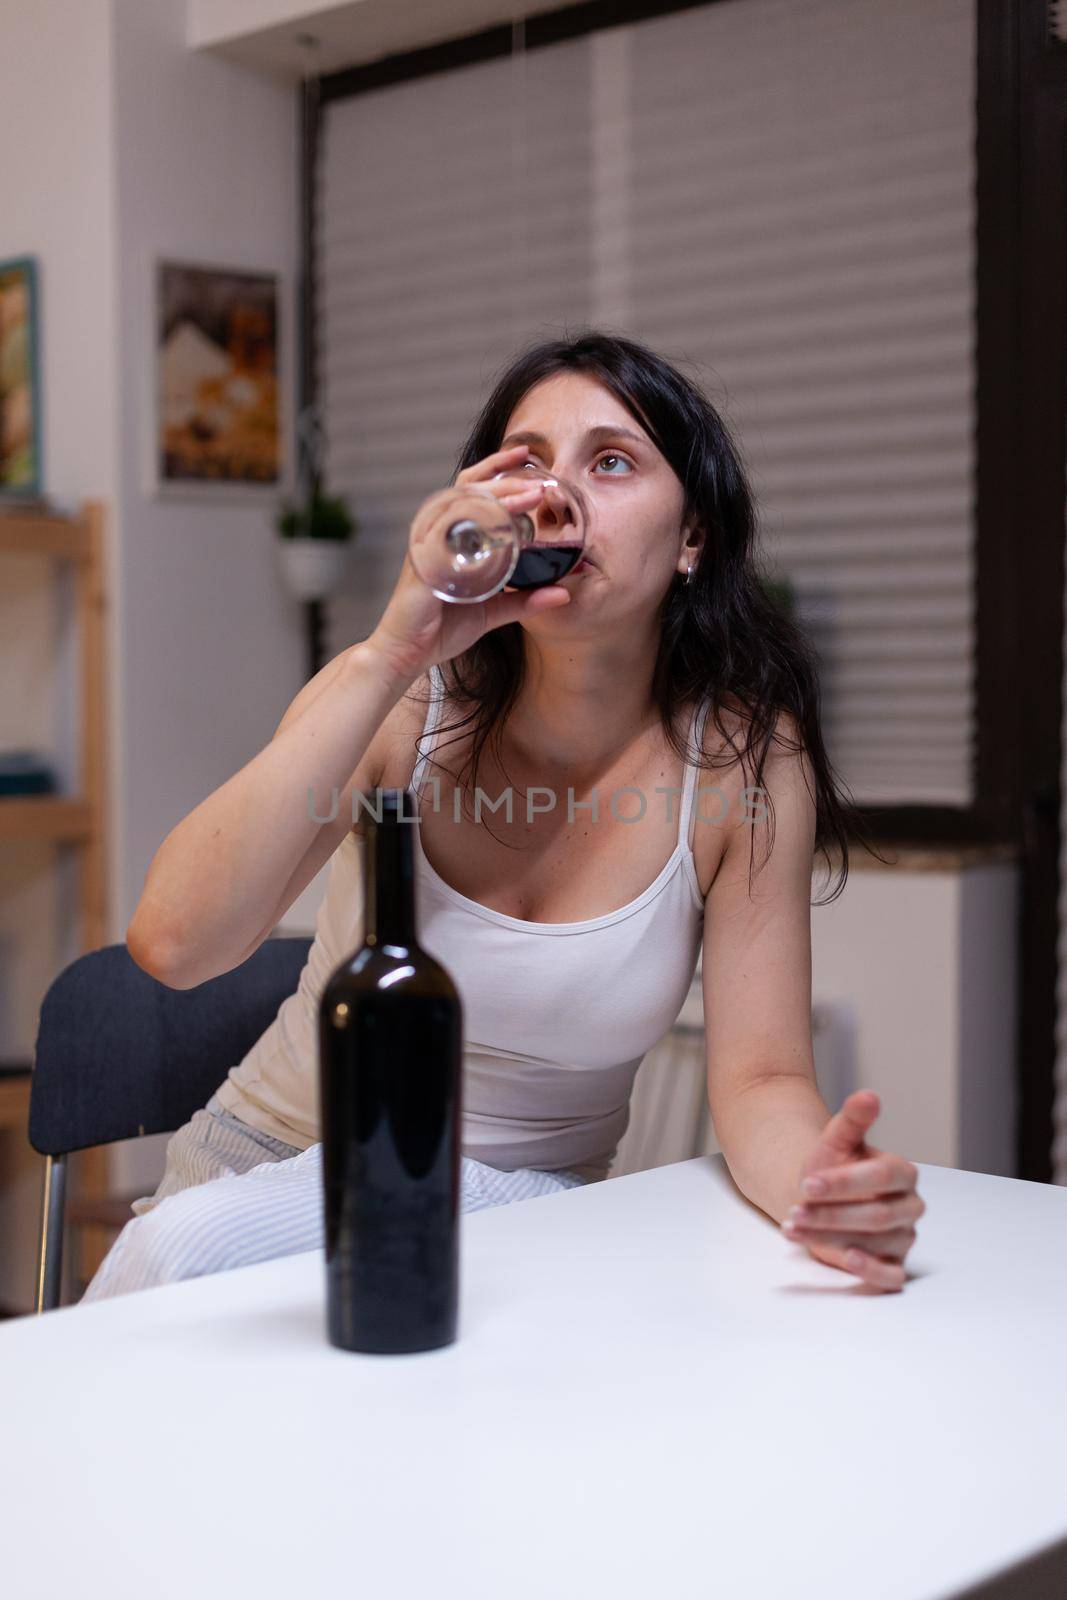 Alcoholic woman having bottle of wine and glass feeling sad at home. Lonely person drinking beverage with alcohol being depressive. Adult with addiction feeling emotional and upset